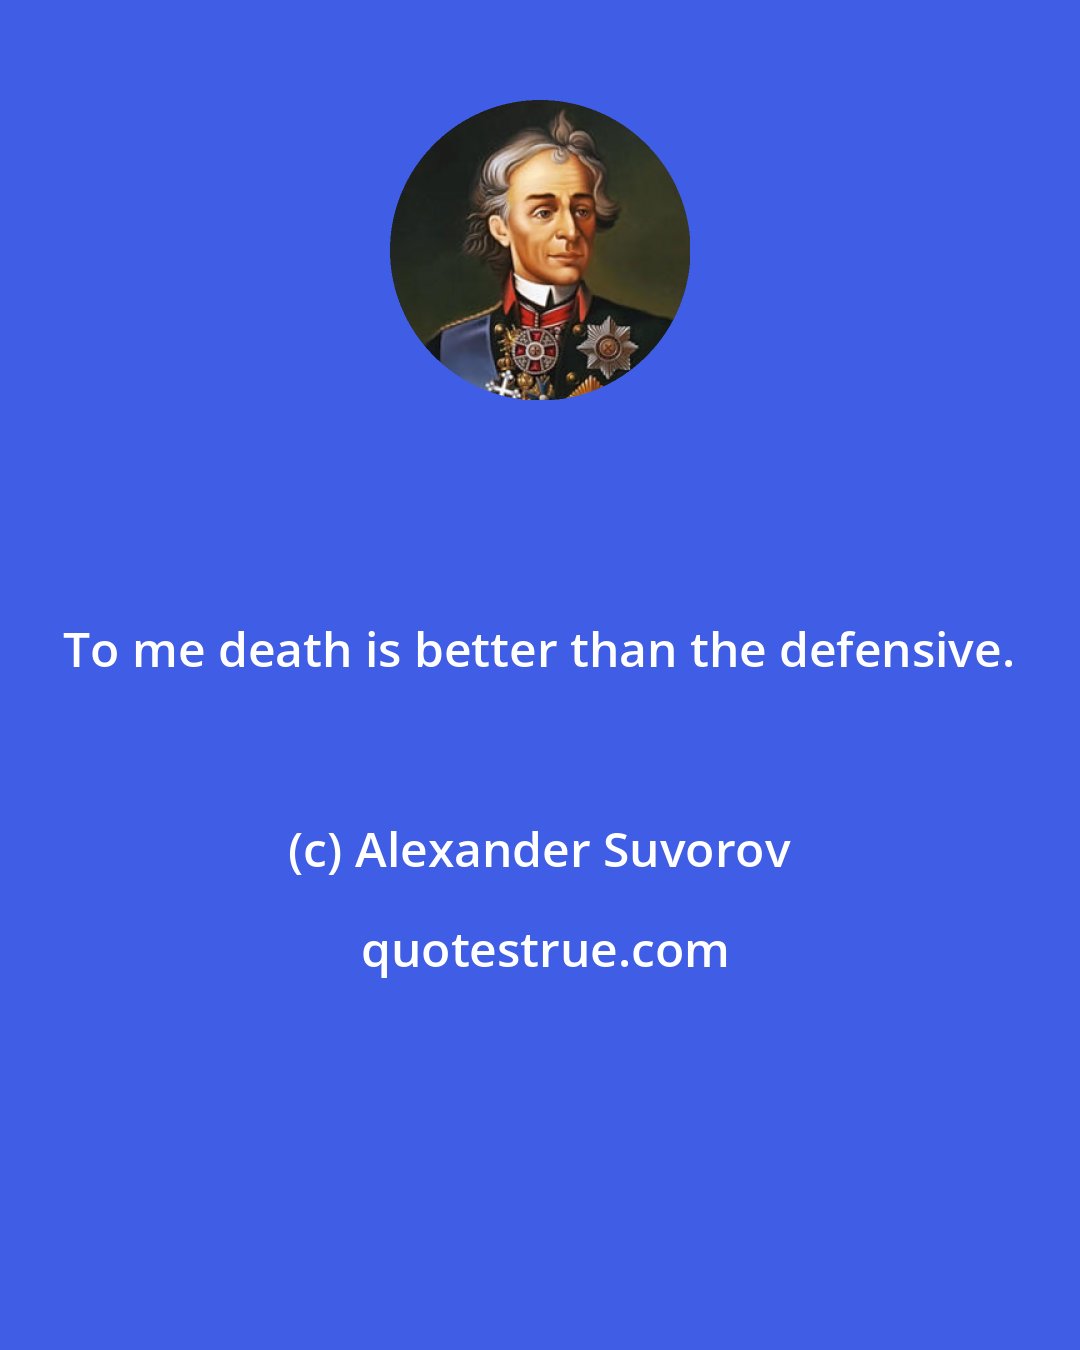 Alexander Suvorov: To me death is better than the defensive.